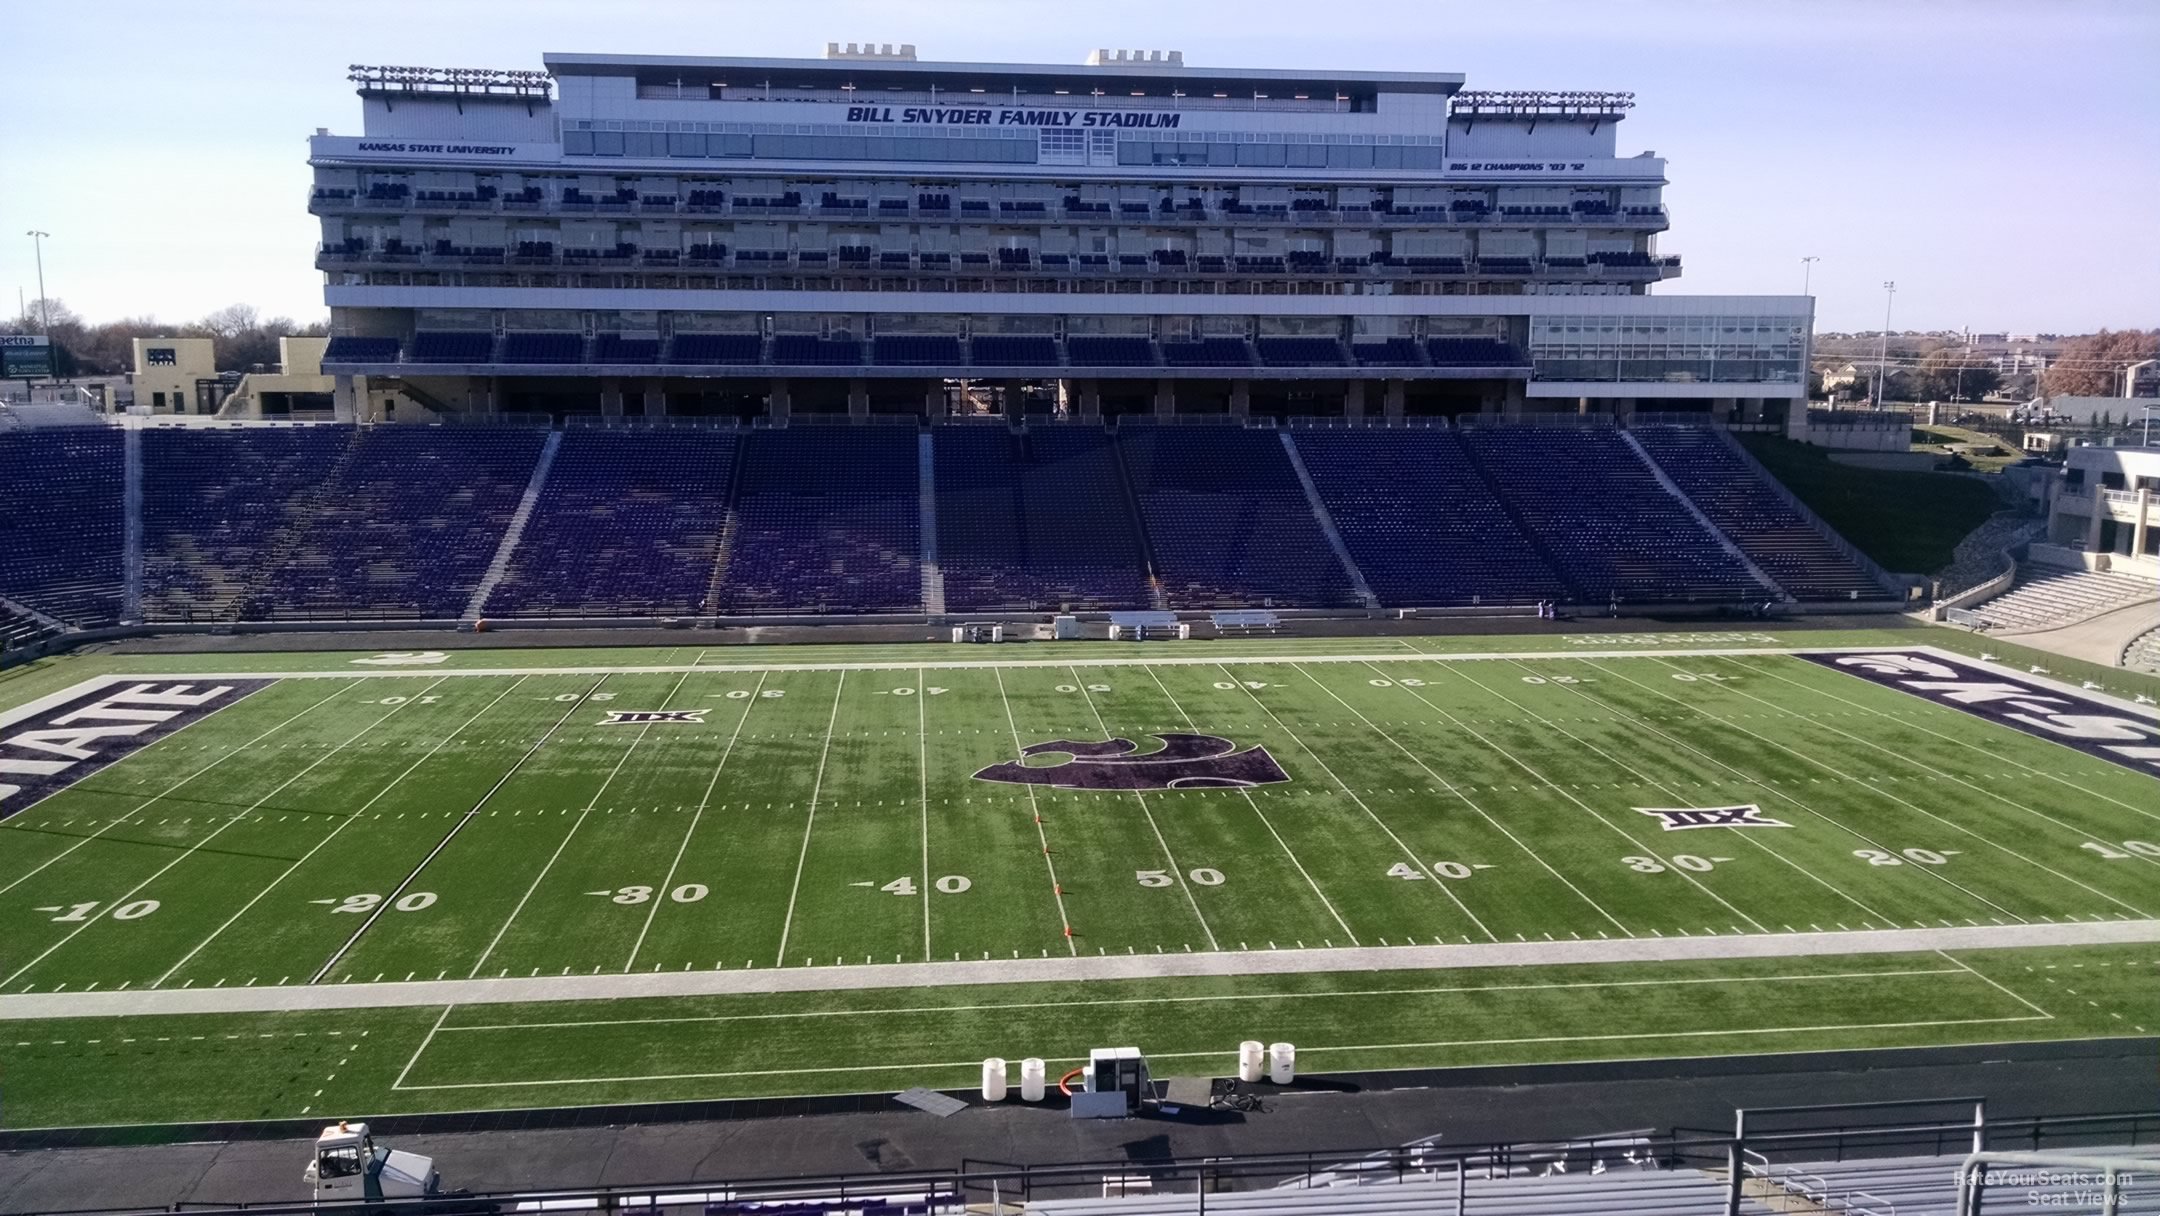 section 226, row 9 seat view  - bill snyder family stadium